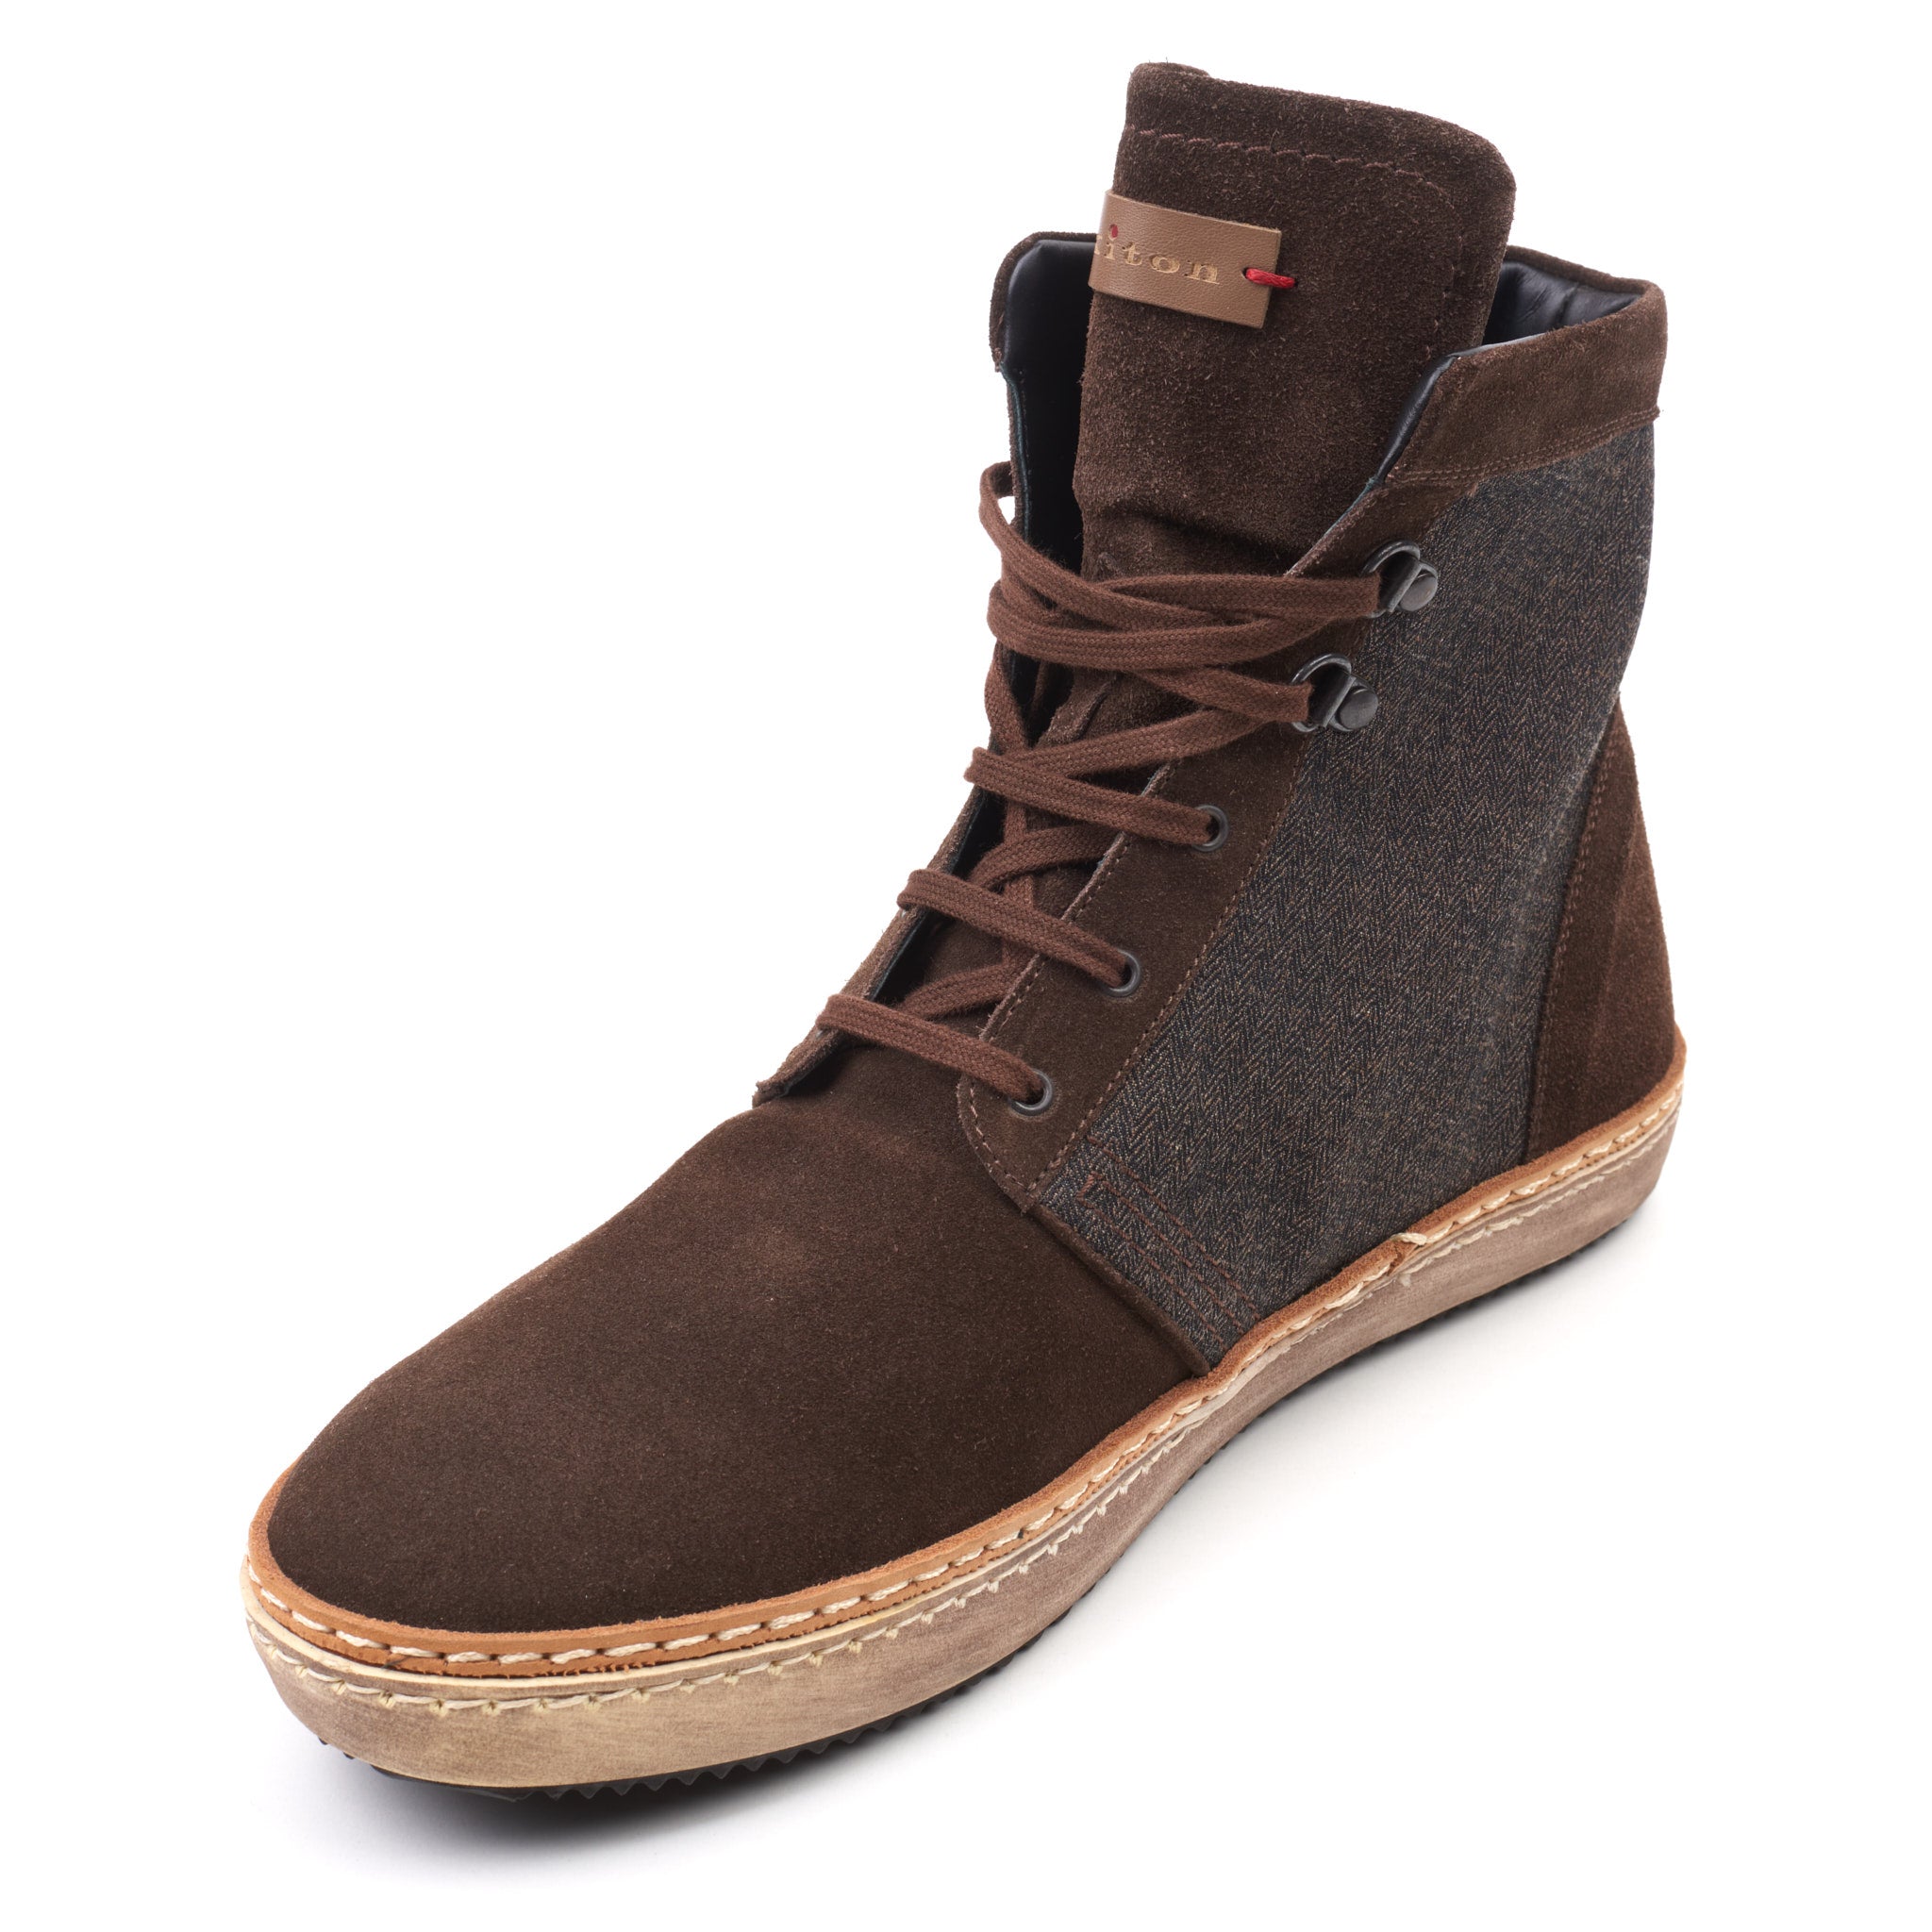 KITON Calfskin Suede Leather-Canvas High-Top Shoes Boots Sneakers US 9.5 NEW Box KITON